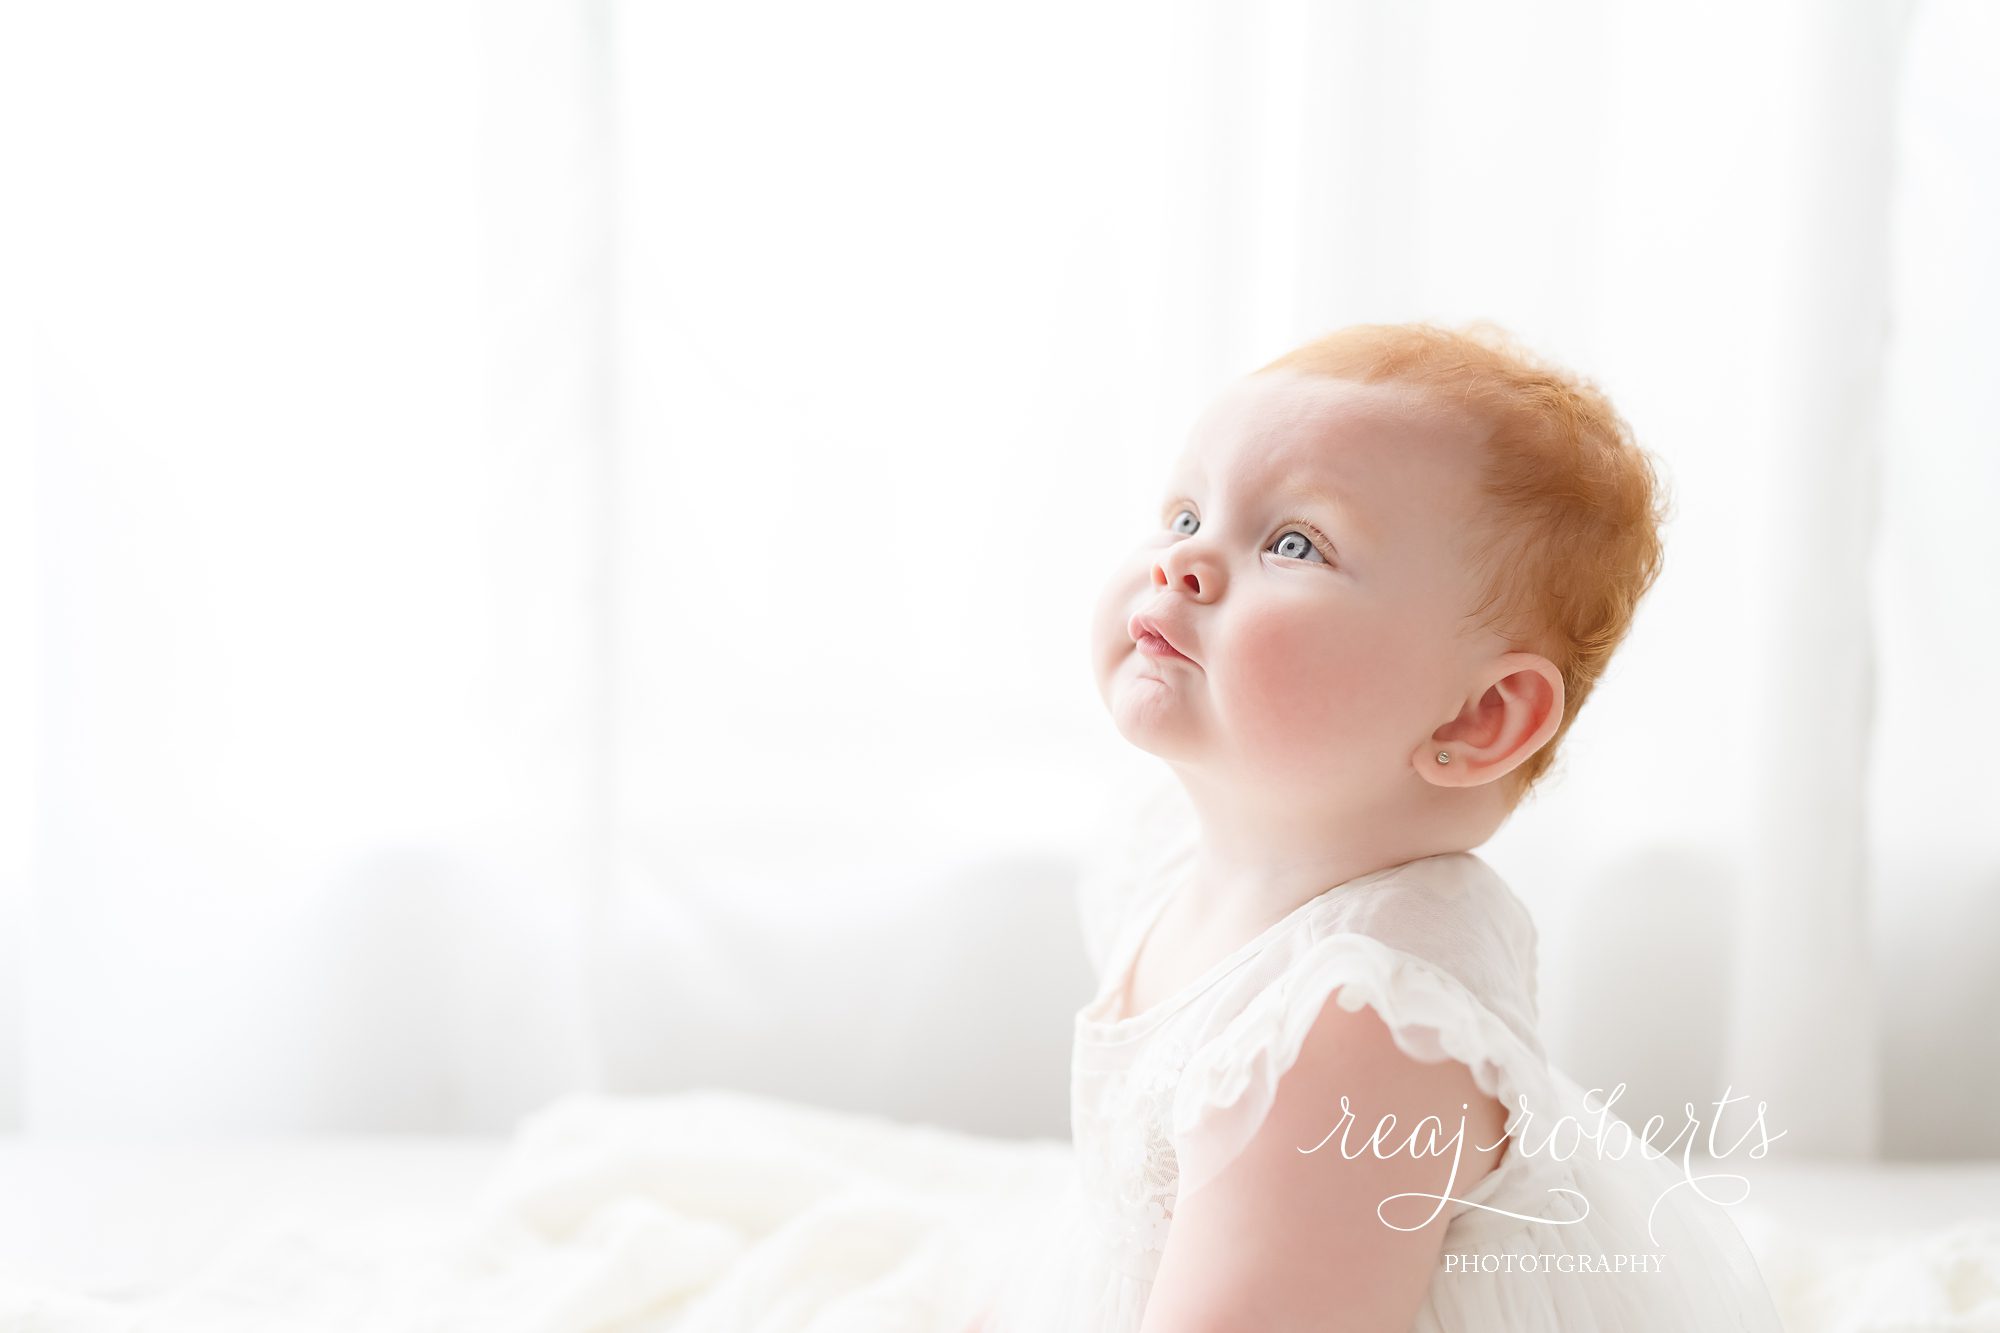 baby with blue eyes red hair in white dress © Reaj Roberts Photography